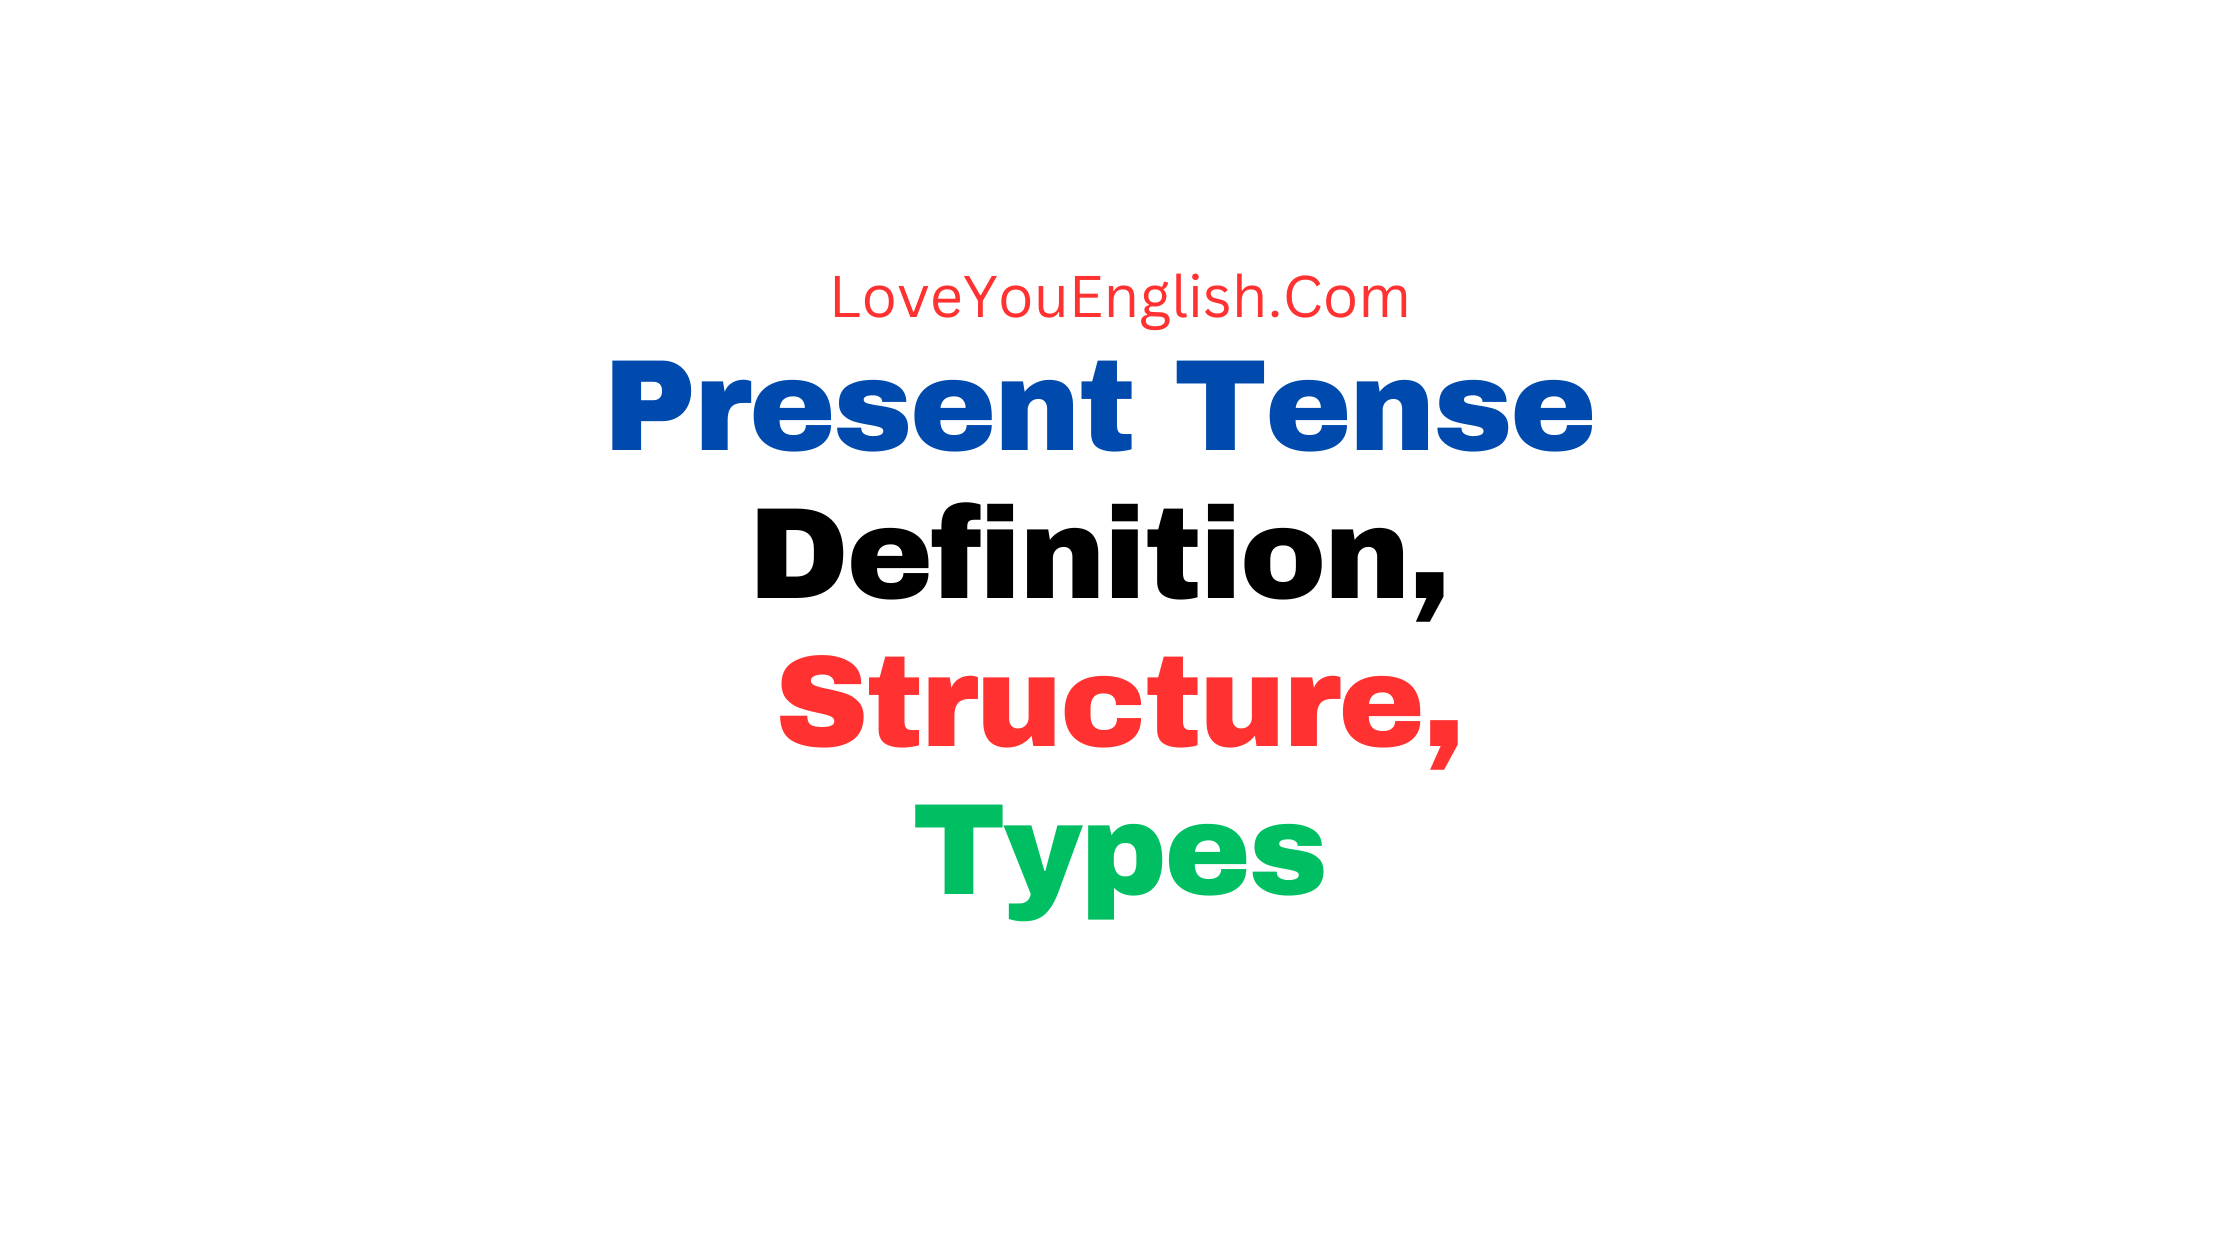 Present Tense - Definition, Structure, Types, Rules and Examples